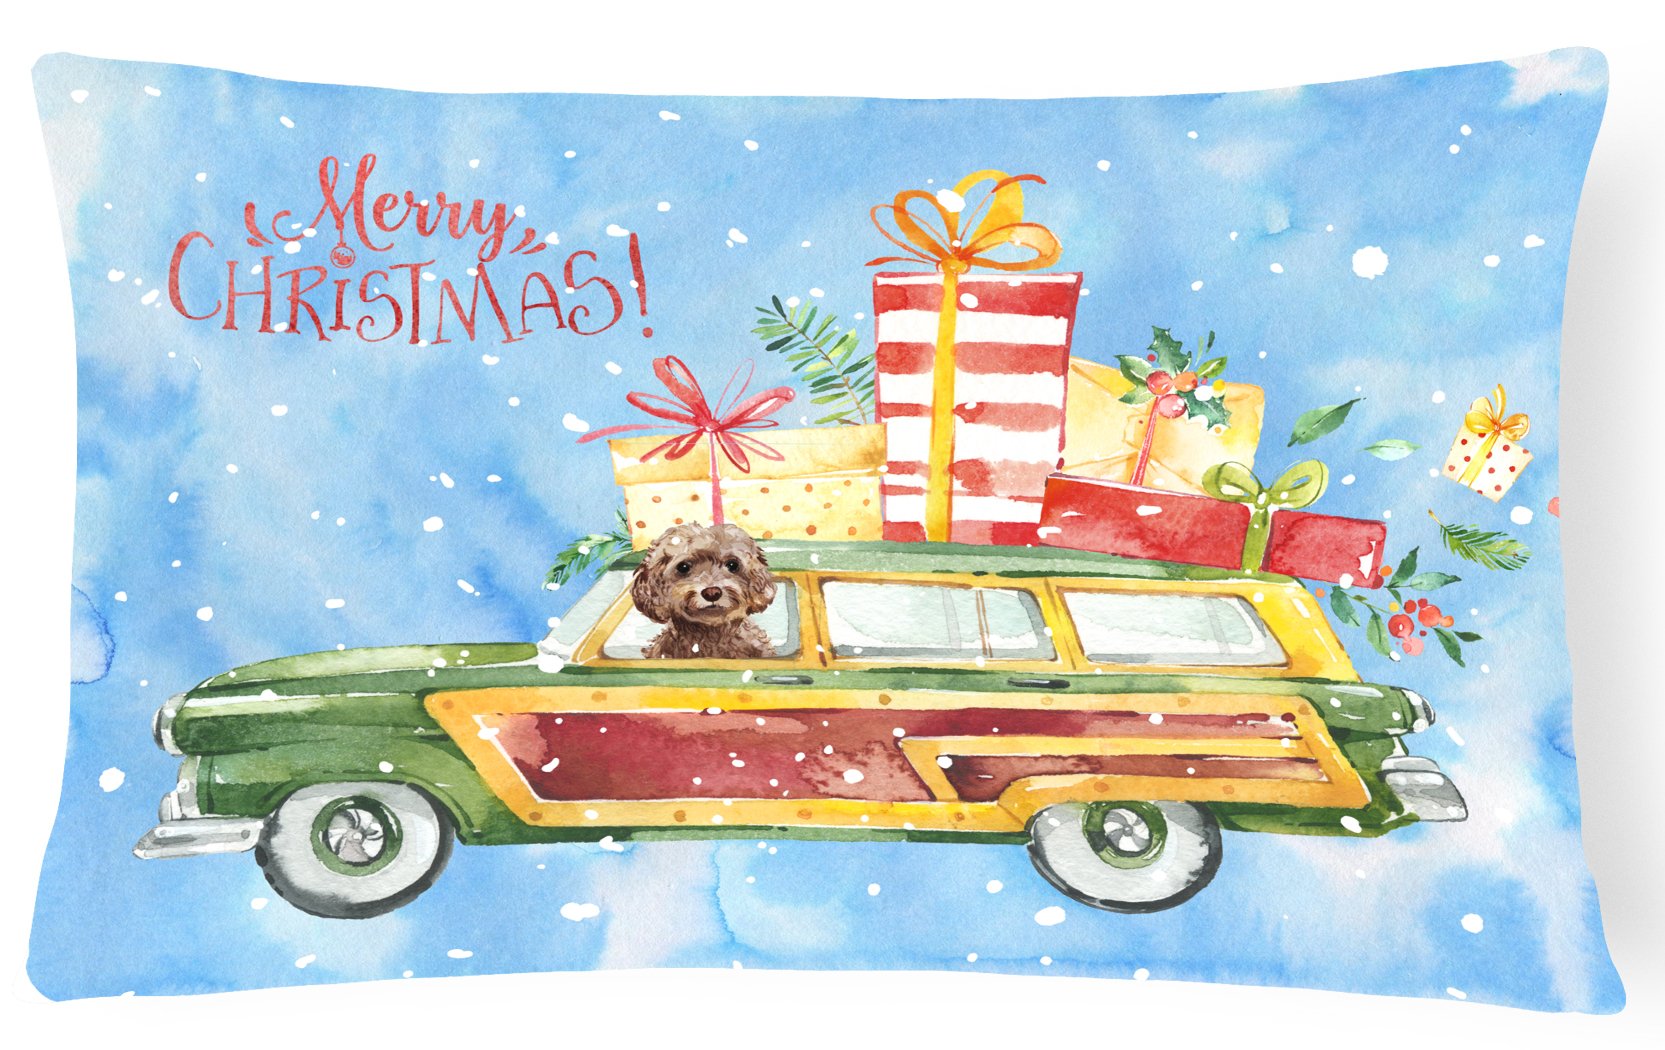 Merry Christmas Brown Cockapoo Canvas Fabric Decorative Pillow CK2446PW1216 by Caroline's Treasures